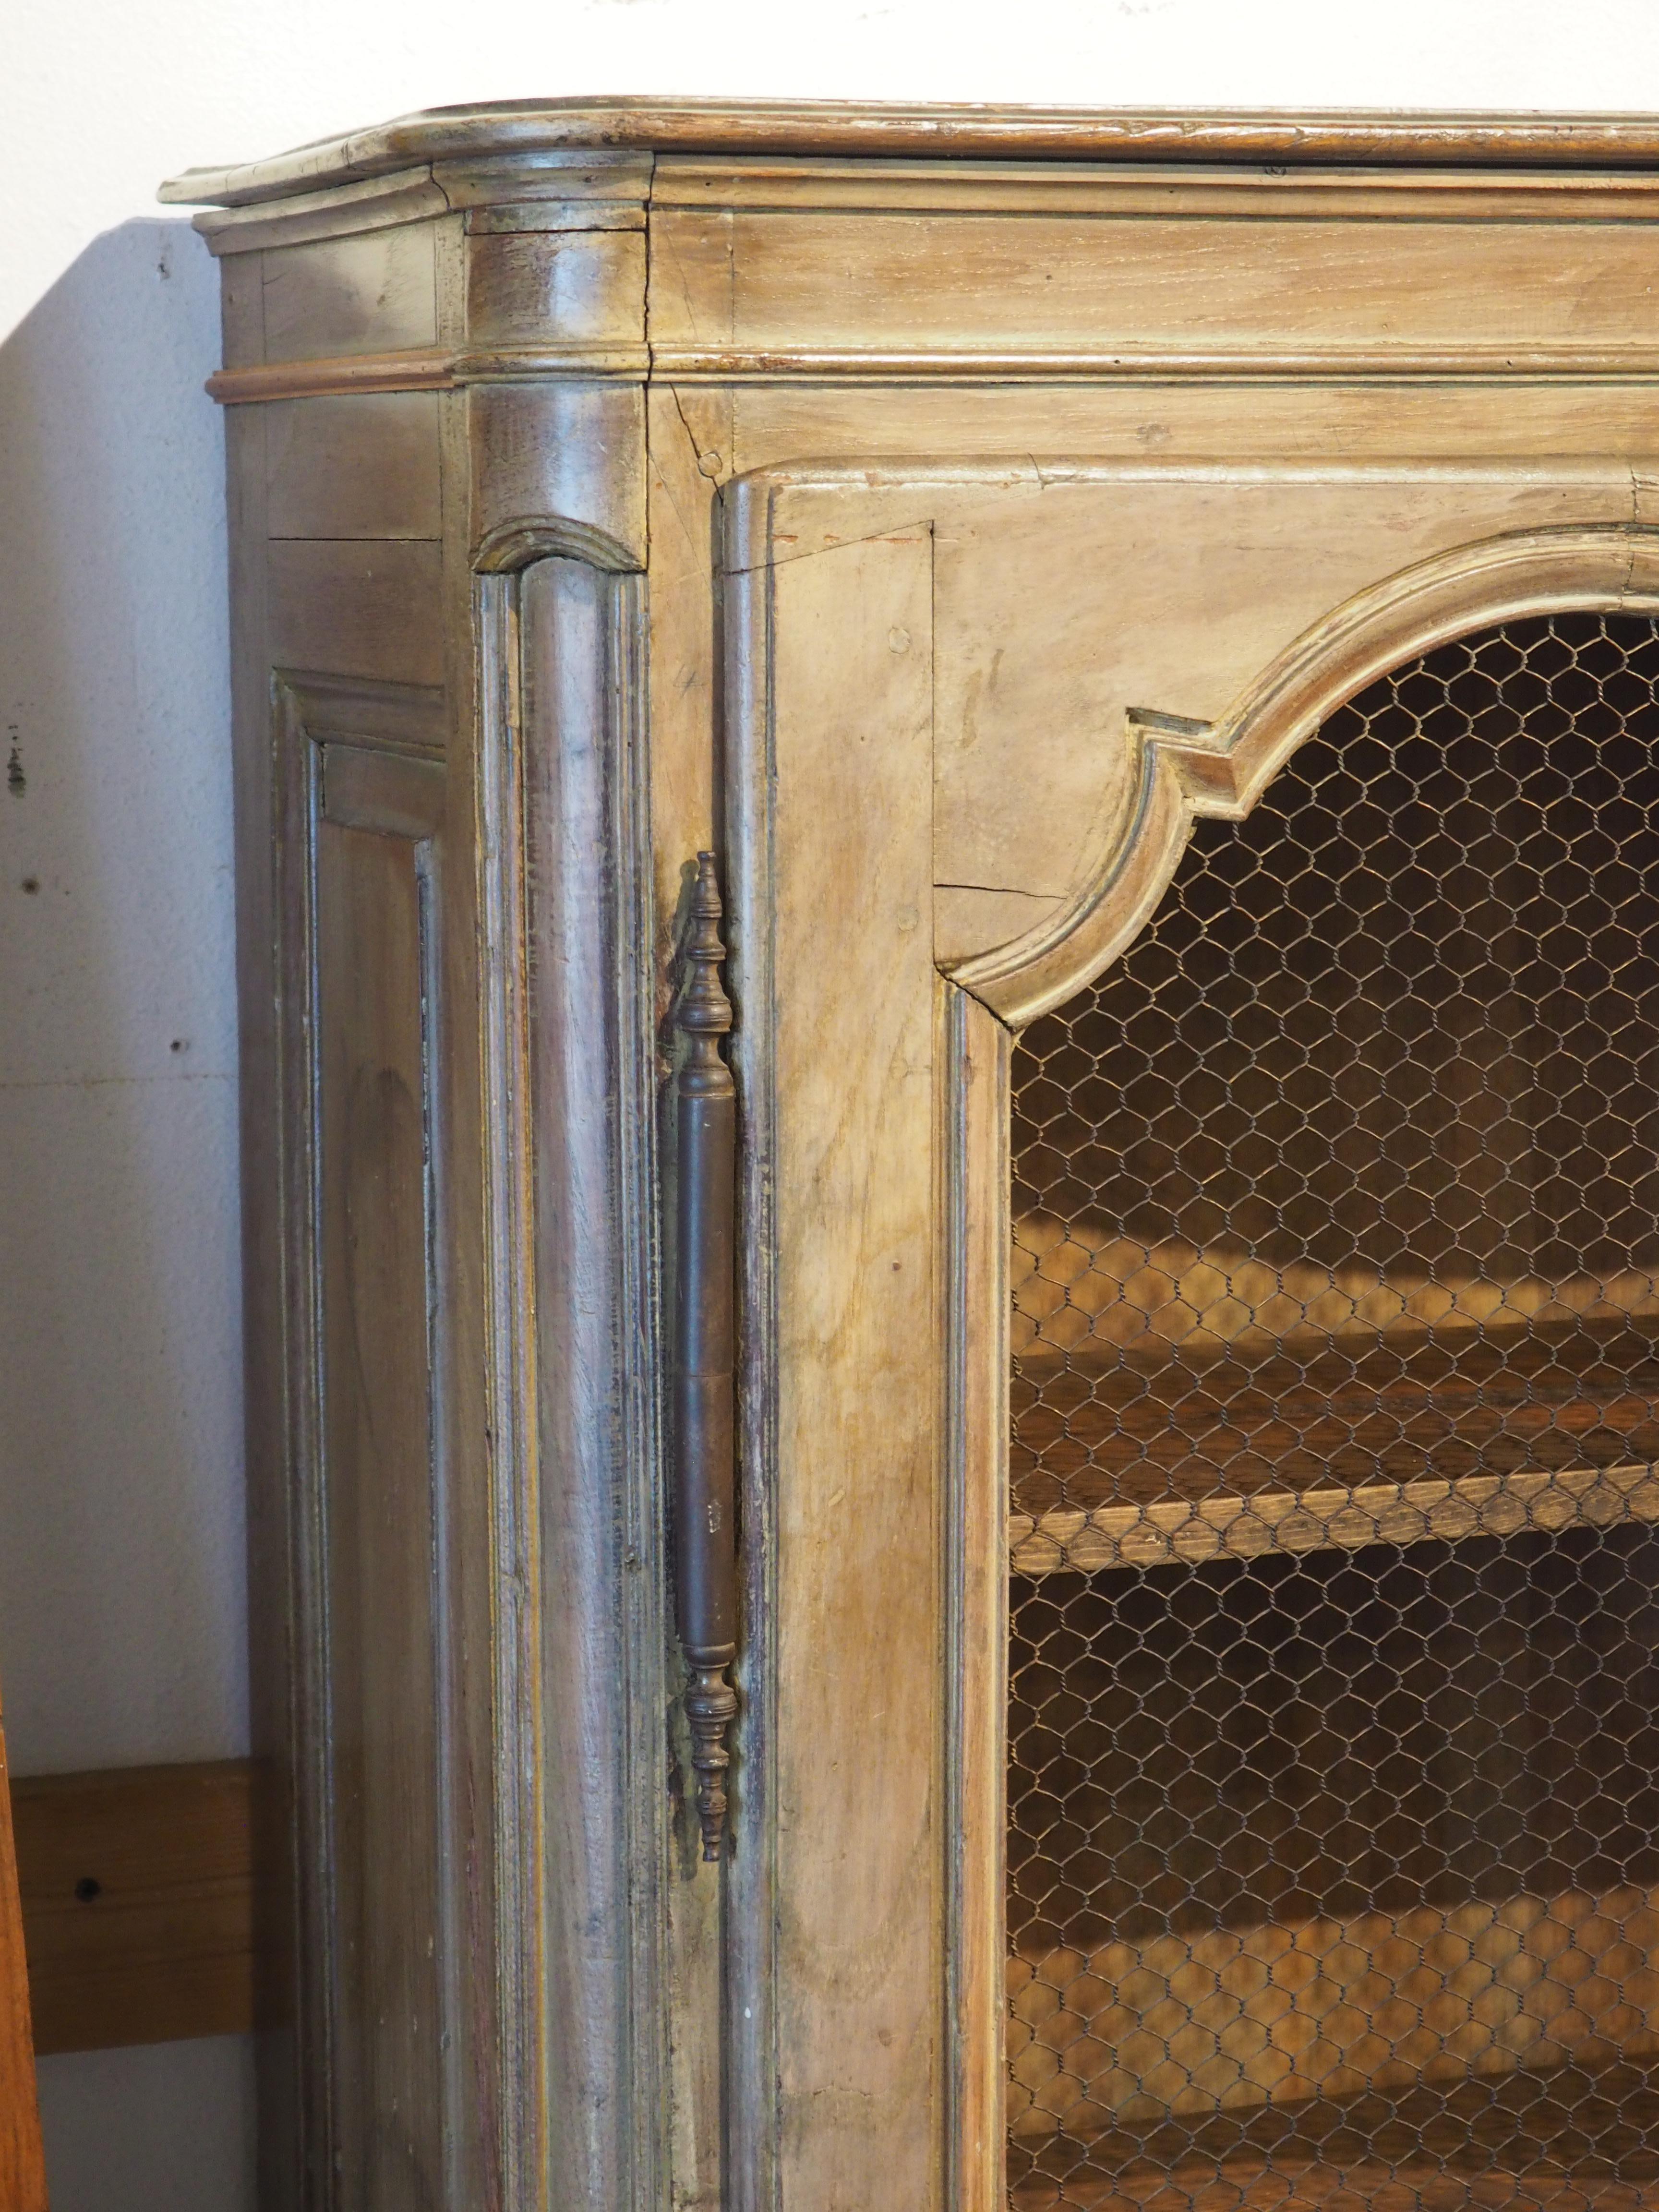 Early 19th Century French Bibliotheque Cabinet with Wire Mesh Door Panels 6